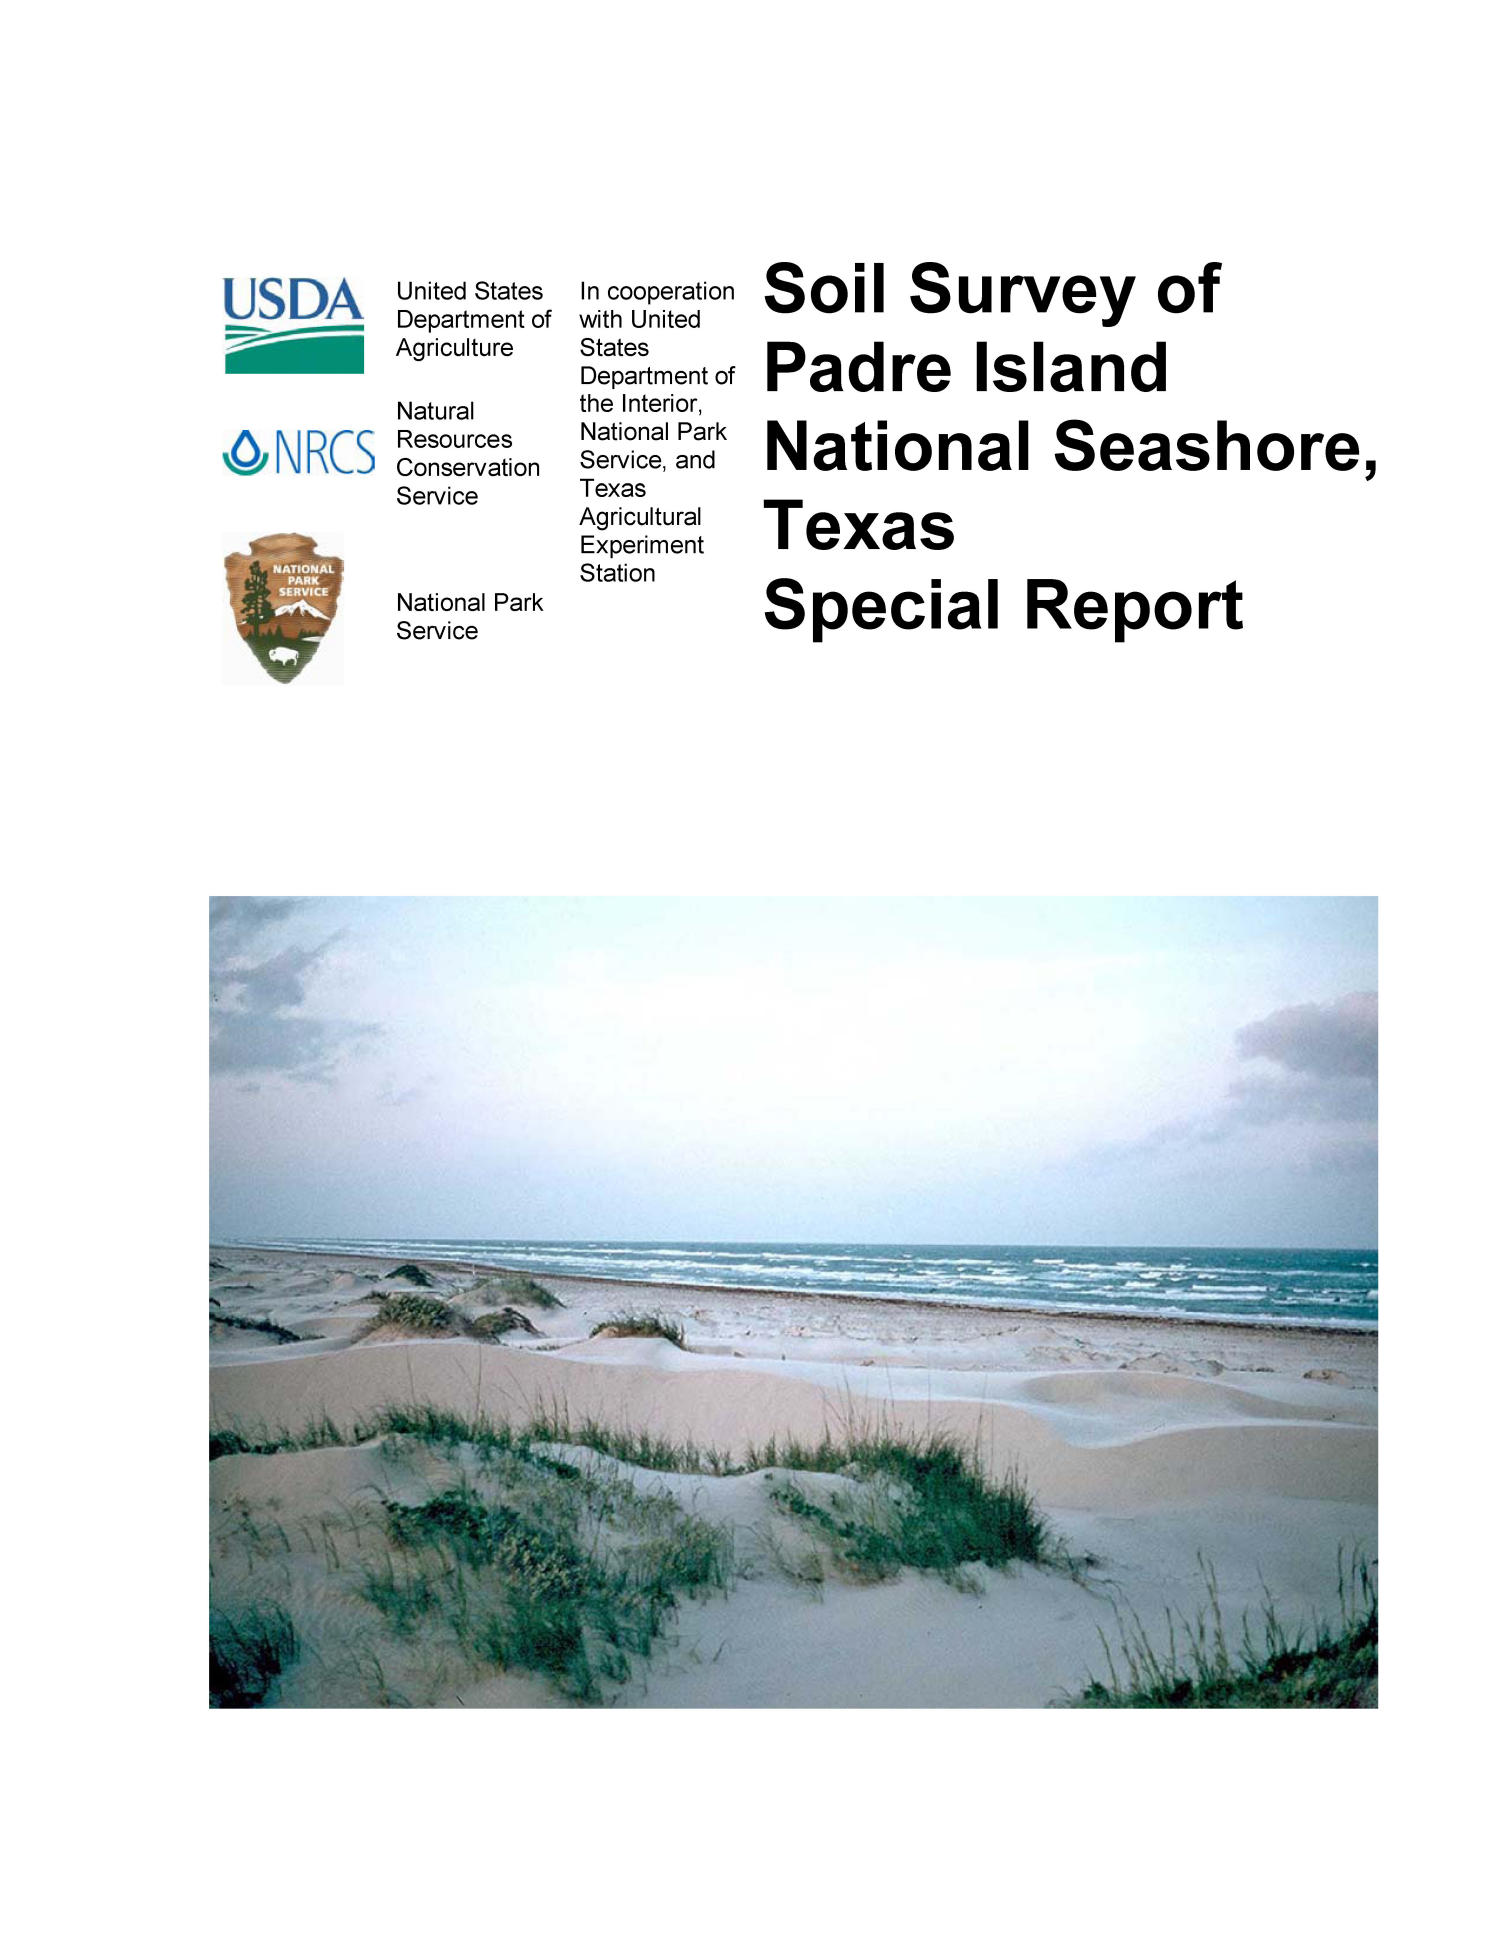 Soil Survey of Padre Island National Seashore, Texas: Special Report
                                                
                                                    Front Cover
                                                